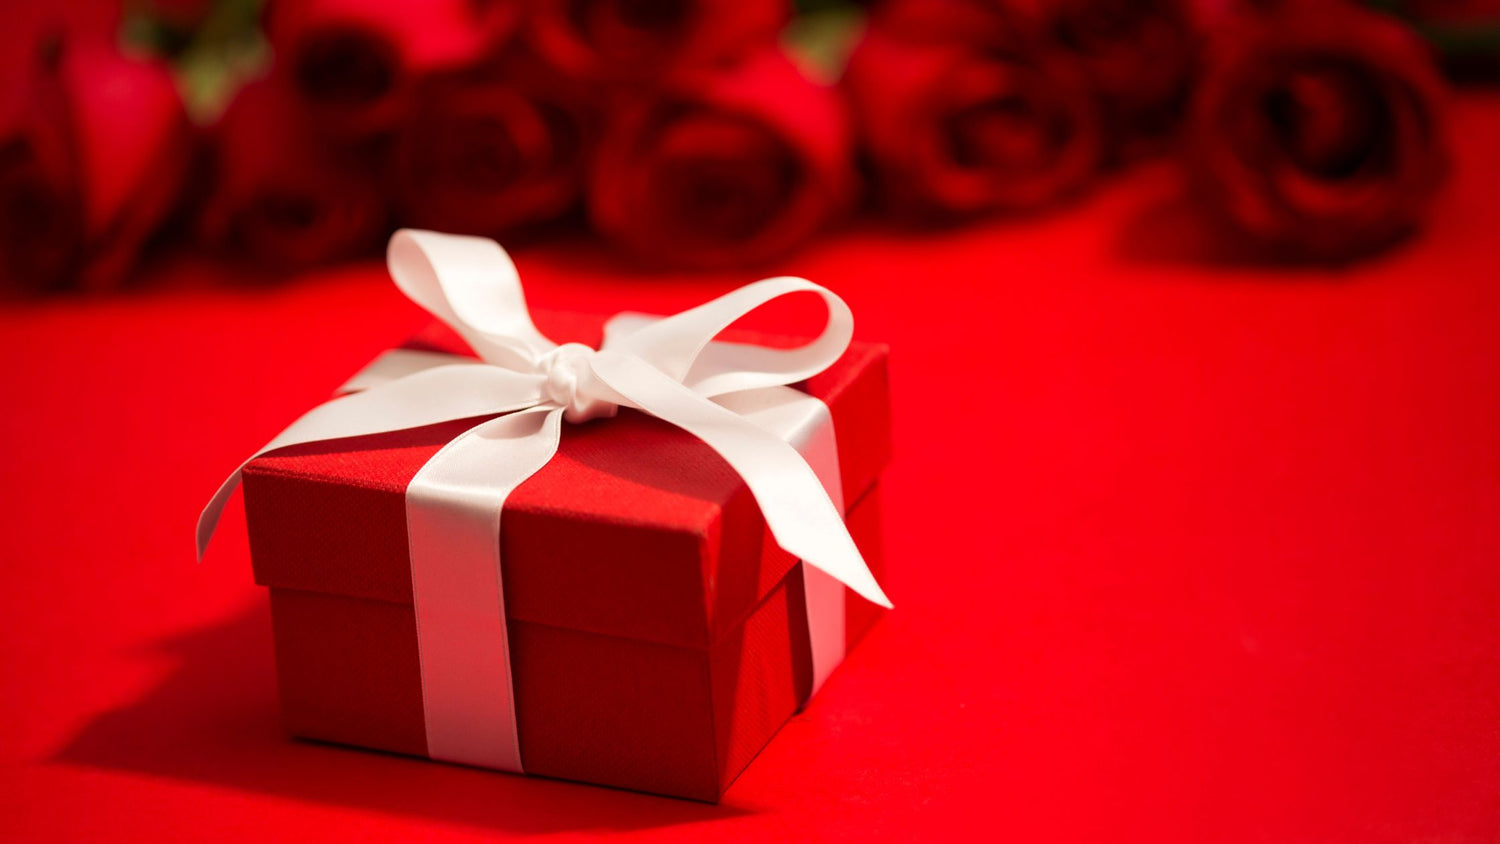 Valentine's Day Gift Ideas for Her: Choose The Best Surprise for Your Woman